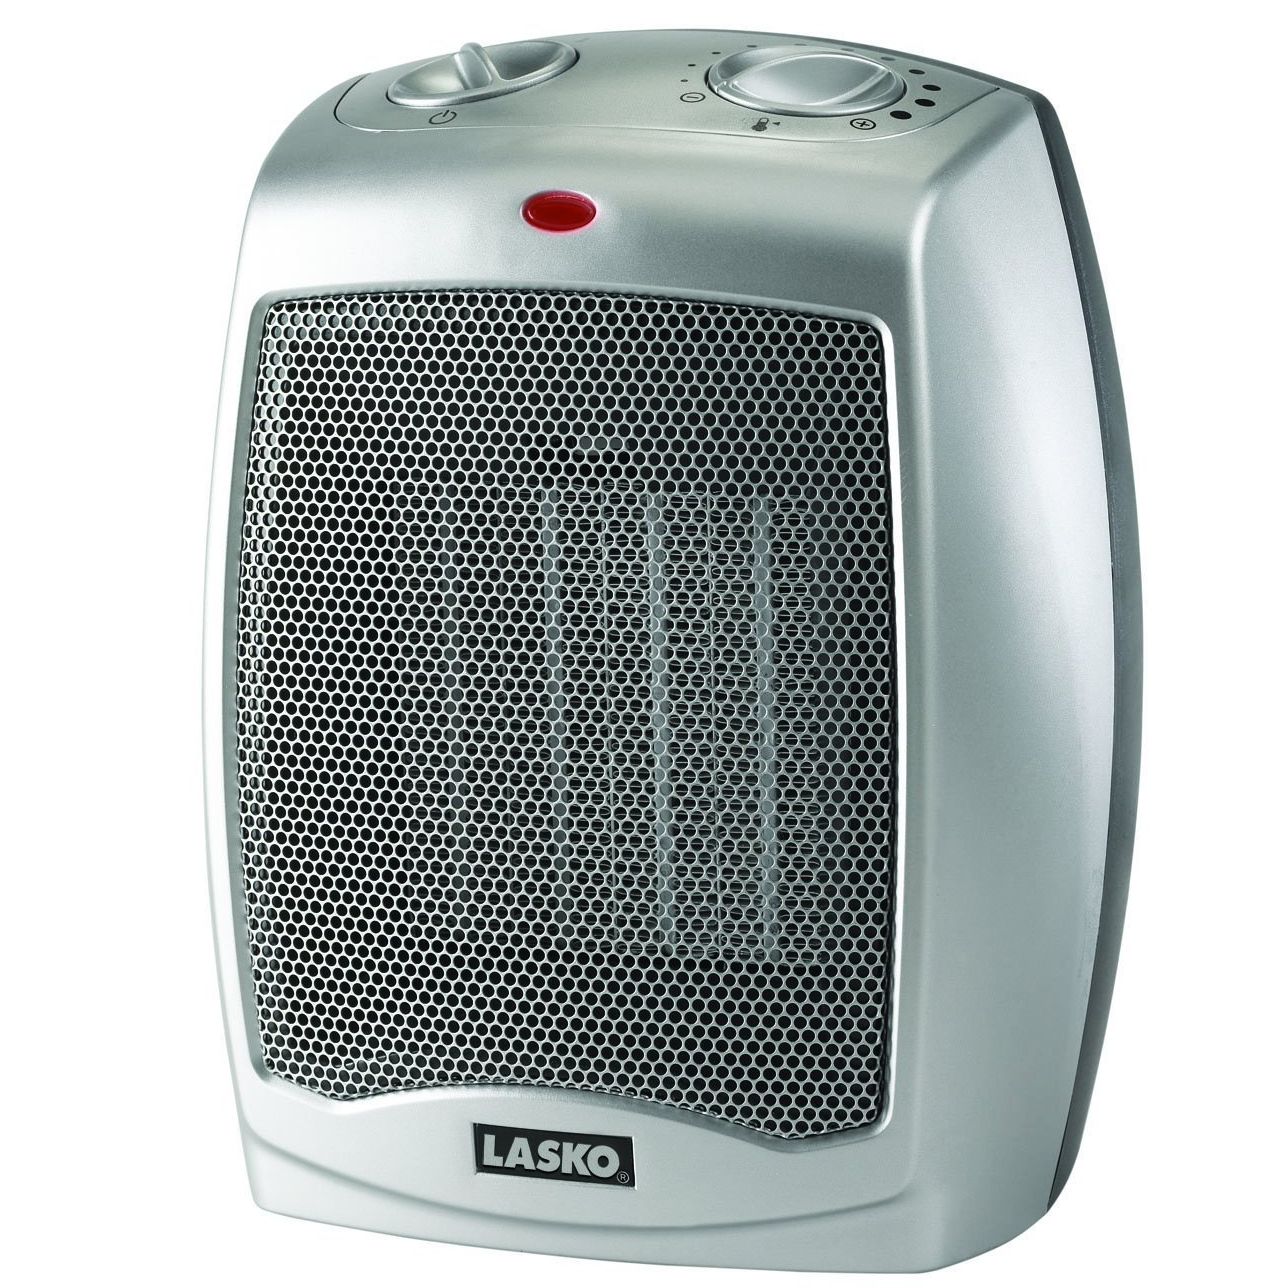 Lasko Ceramic Heater with Adjustable Thermostat Only $22.00! (Highly Rated & #1 Best Seller!)